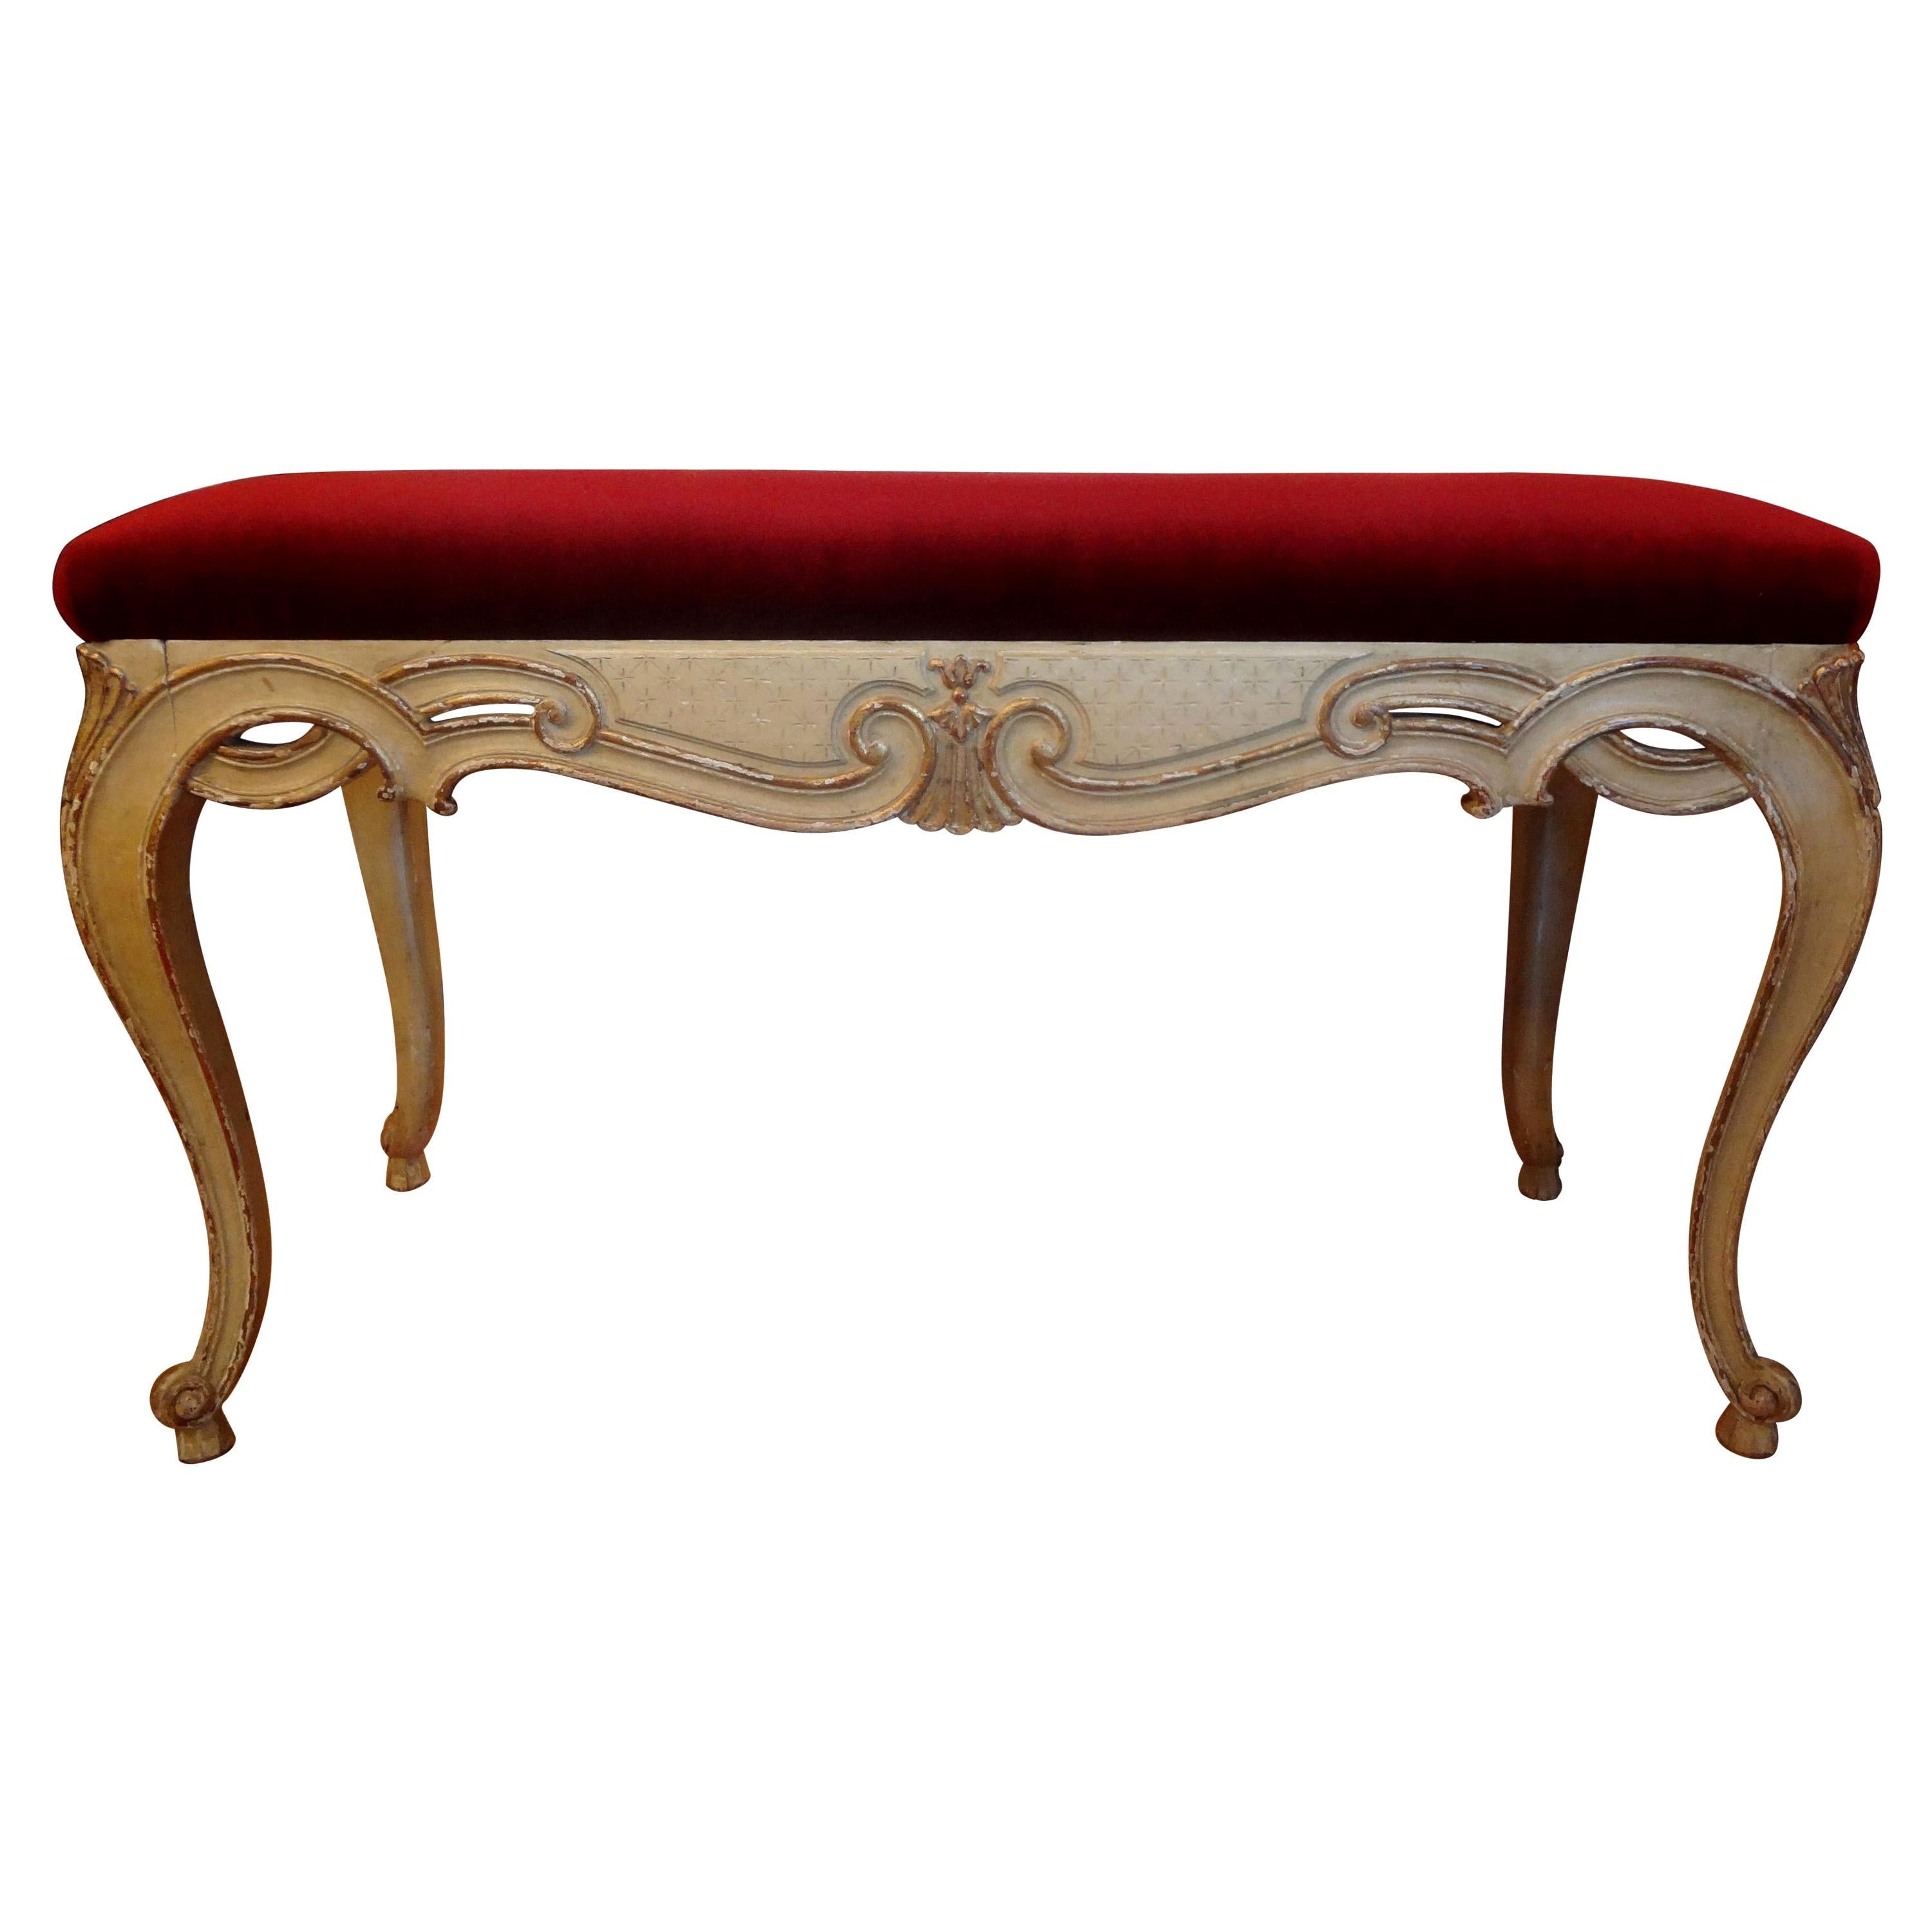 Italian Painted and Giltwood Bench, circa 1920